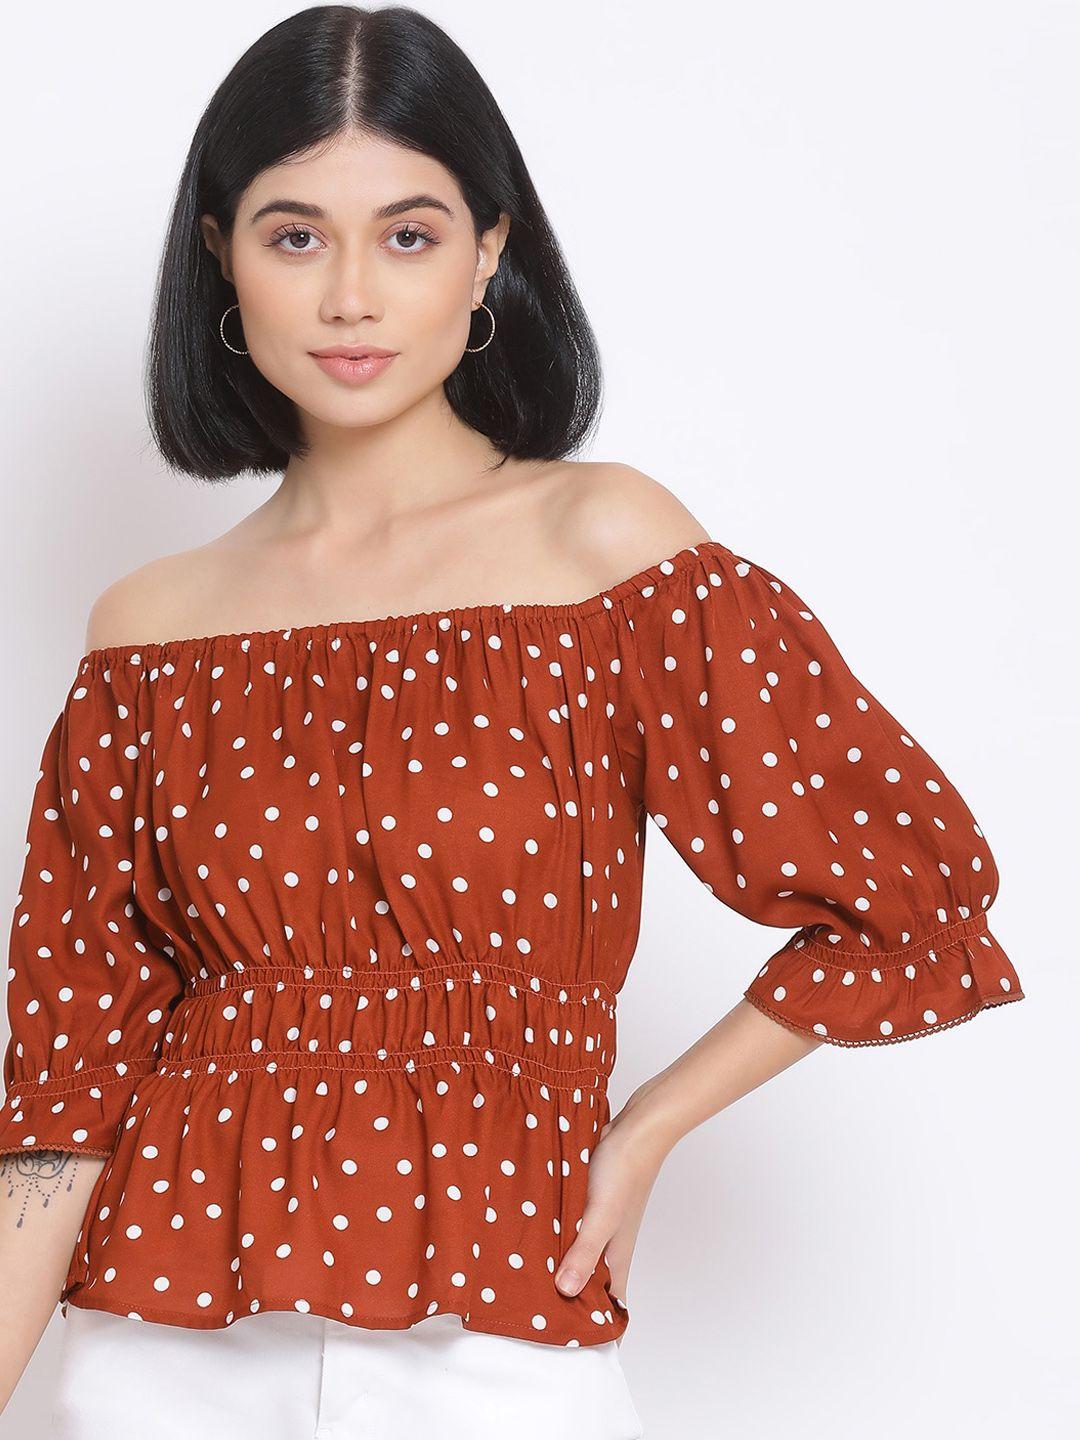 oxolloxo brown & white printed off-shoulder puff sleeves cinched waist top